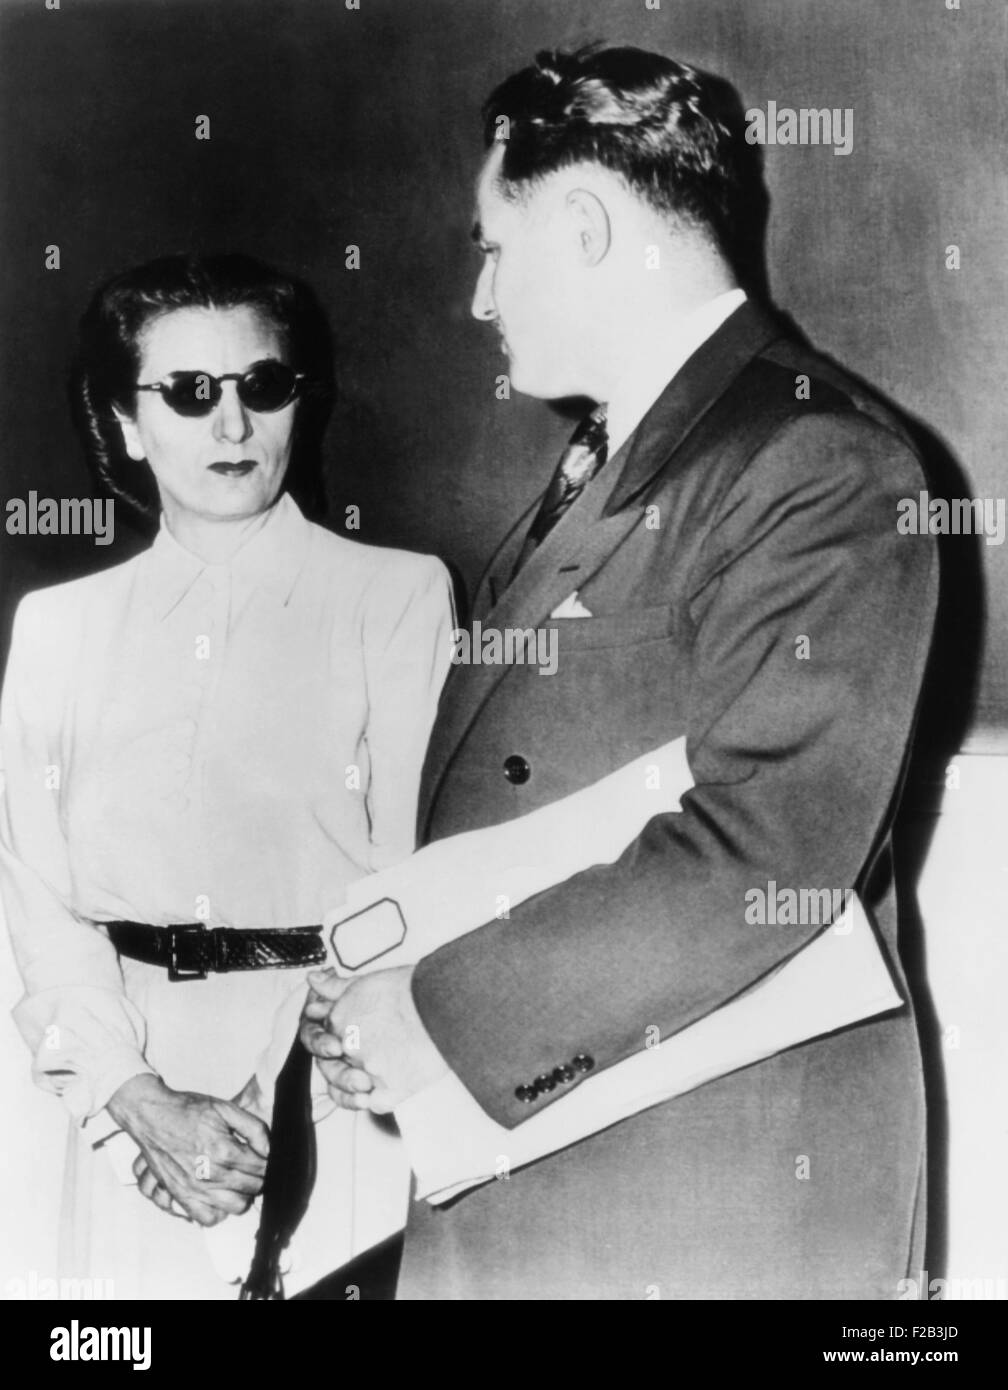 Annette Carvetto, widow of mob boss Frank Nitti, with her lawyer J. R. Stibel. She was subpoenaed to U.S. District Court over income taxes owed the government. August 1, 1946. Nitti was portrayed by Sylvester Stallone in CAPONE 1975; by Stanley Tucci in ROAD TO PERDITION 2002; and by Bill Camp in PUBLIC ENEMIES 2009 . - (CSU 2015 6 184) Stock Photo